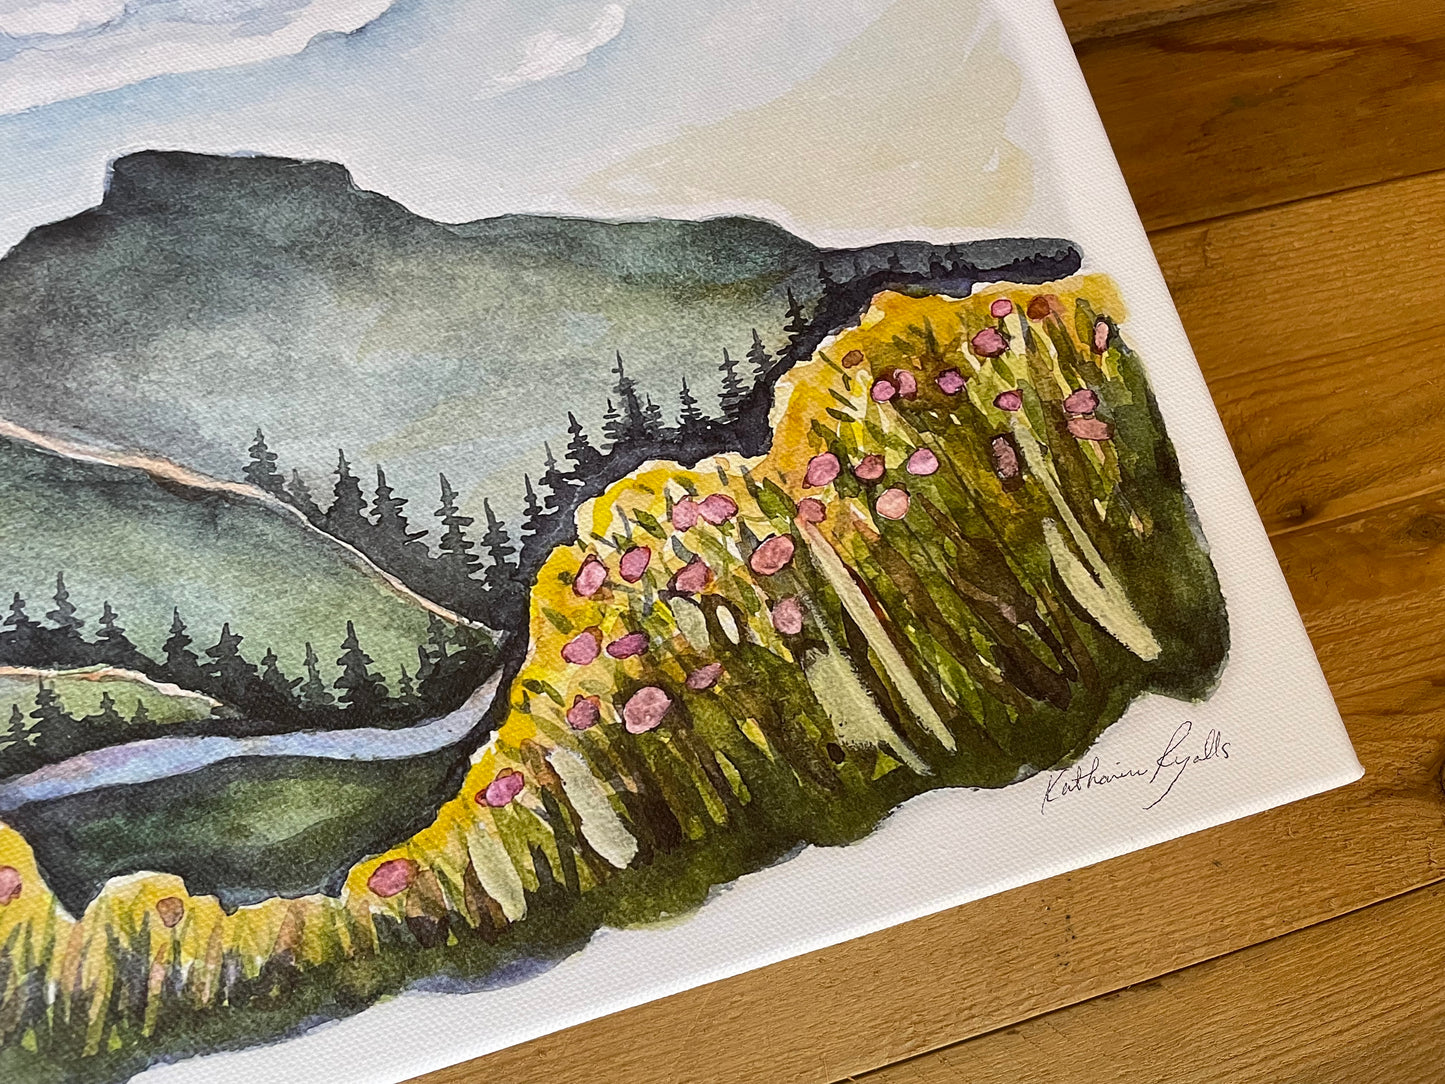 Linville Gorge in Spring CANVAS PRINT  12x16"